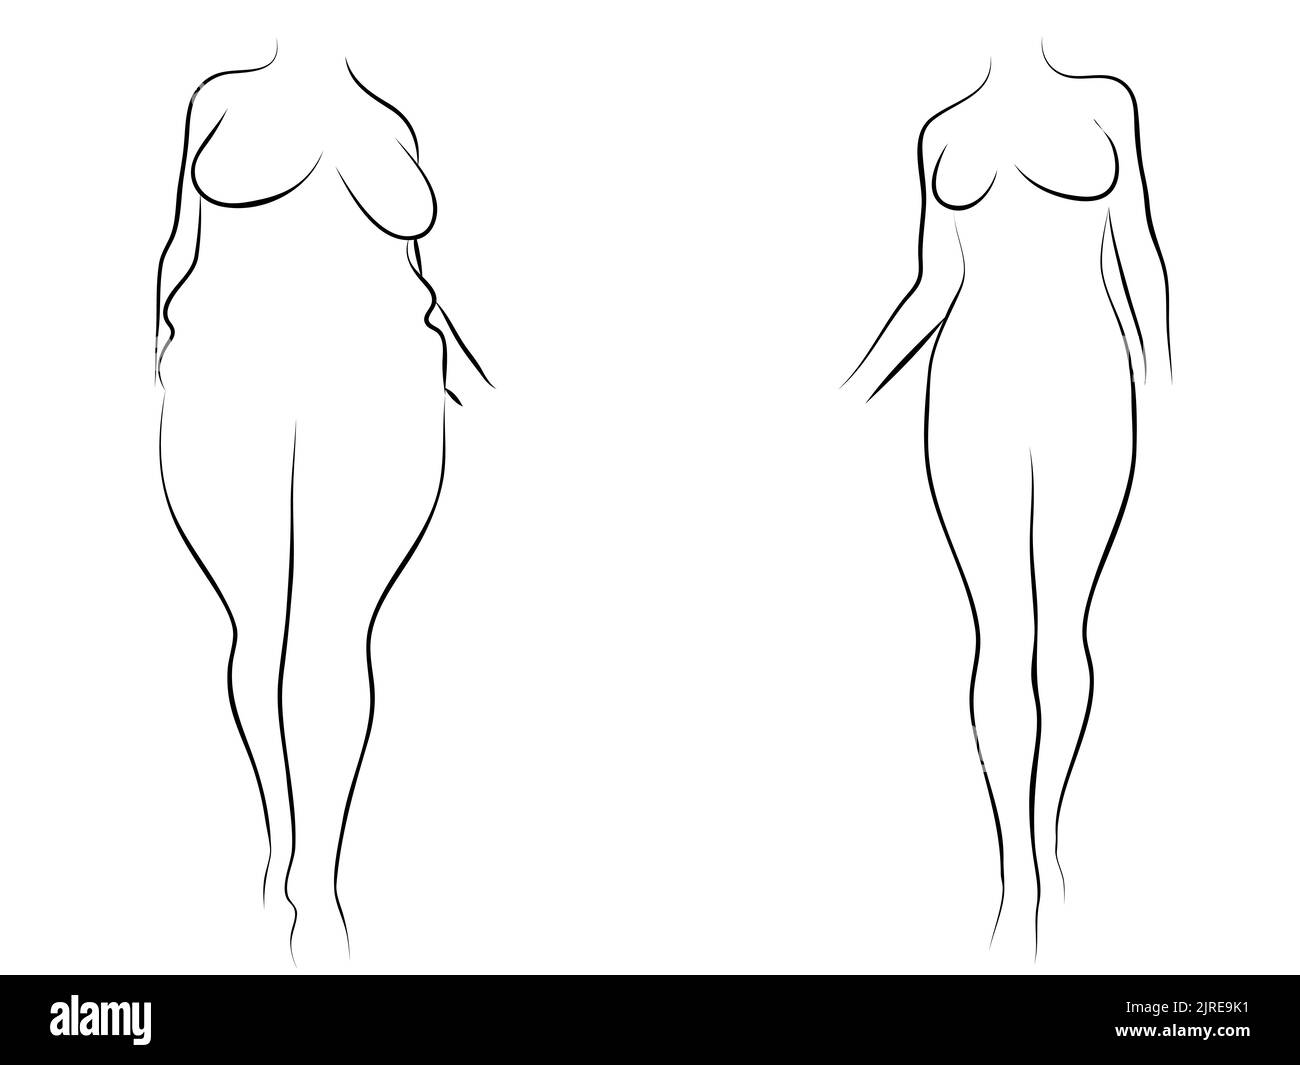 Conceptual fat overweight female vs slim fit healthy body after weight loss or diet with muscles thin young woman. 3D illustration for fitness, nutrit Stock Photo